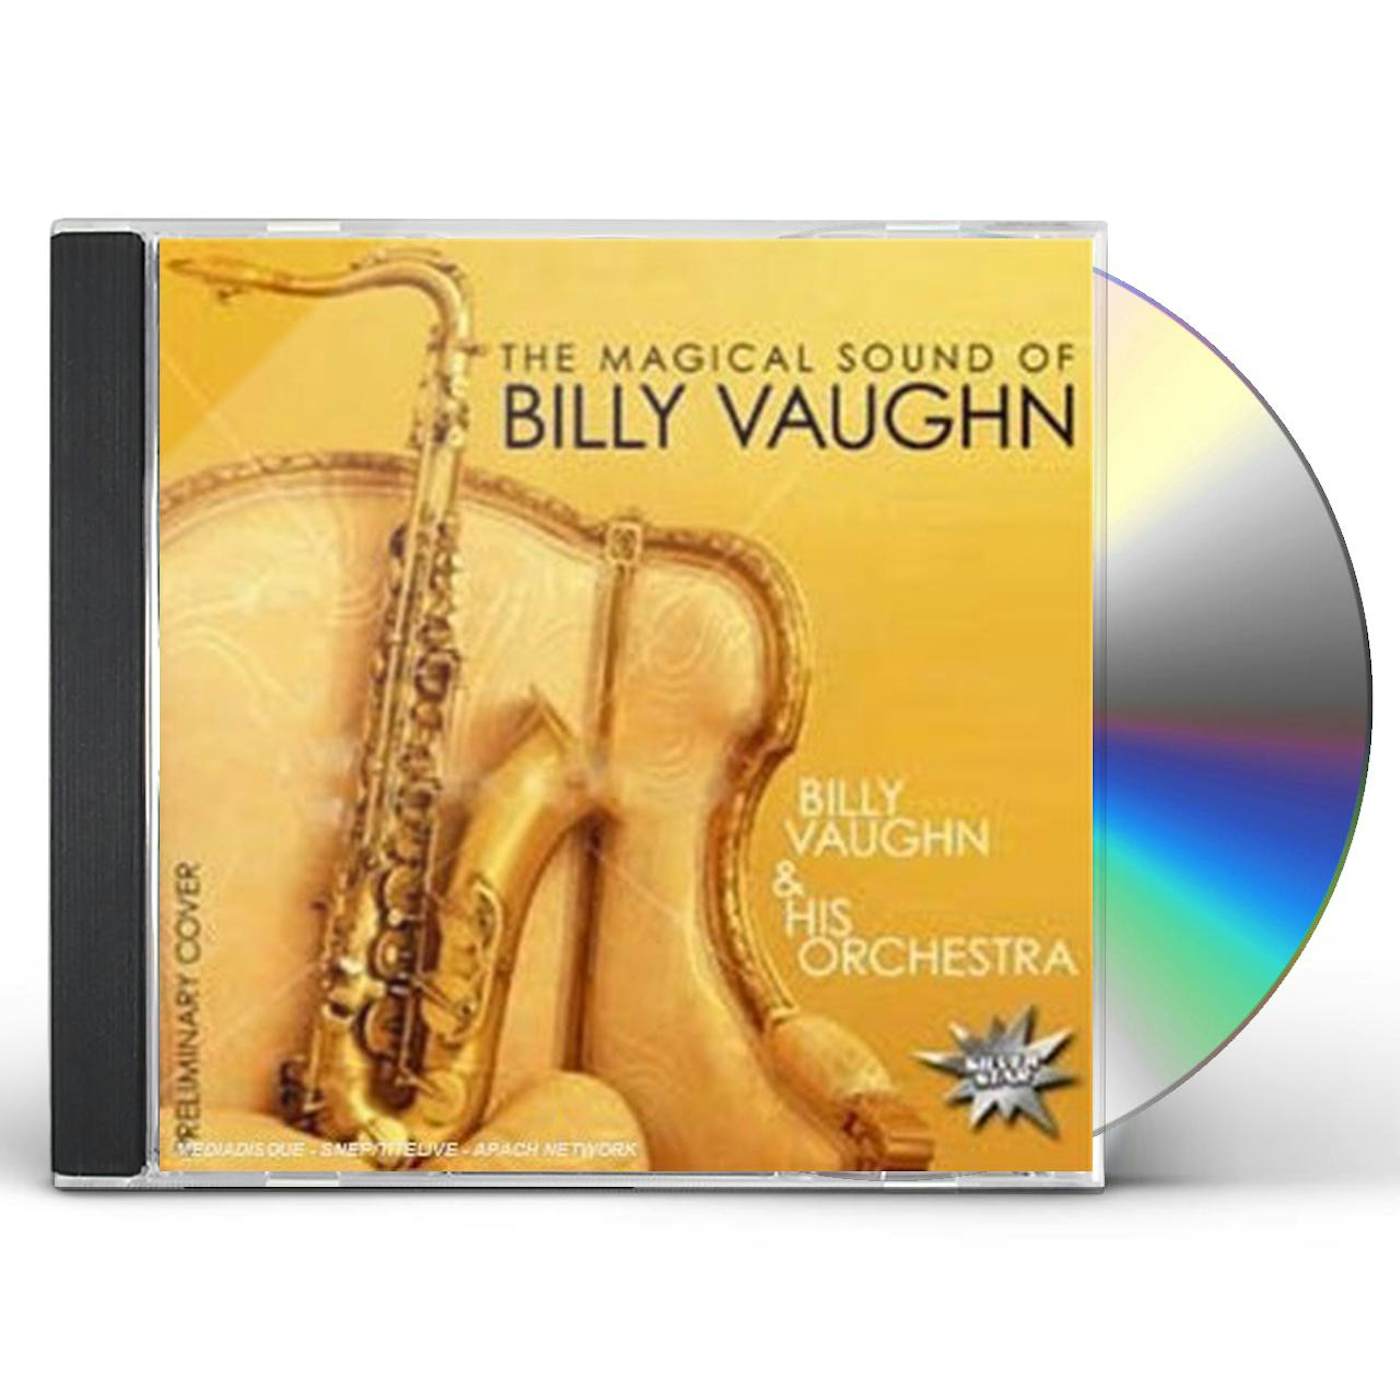 Billy Vaughn & His Orchestra MAGICAL SOUND OF BILLY VAUGHN CD